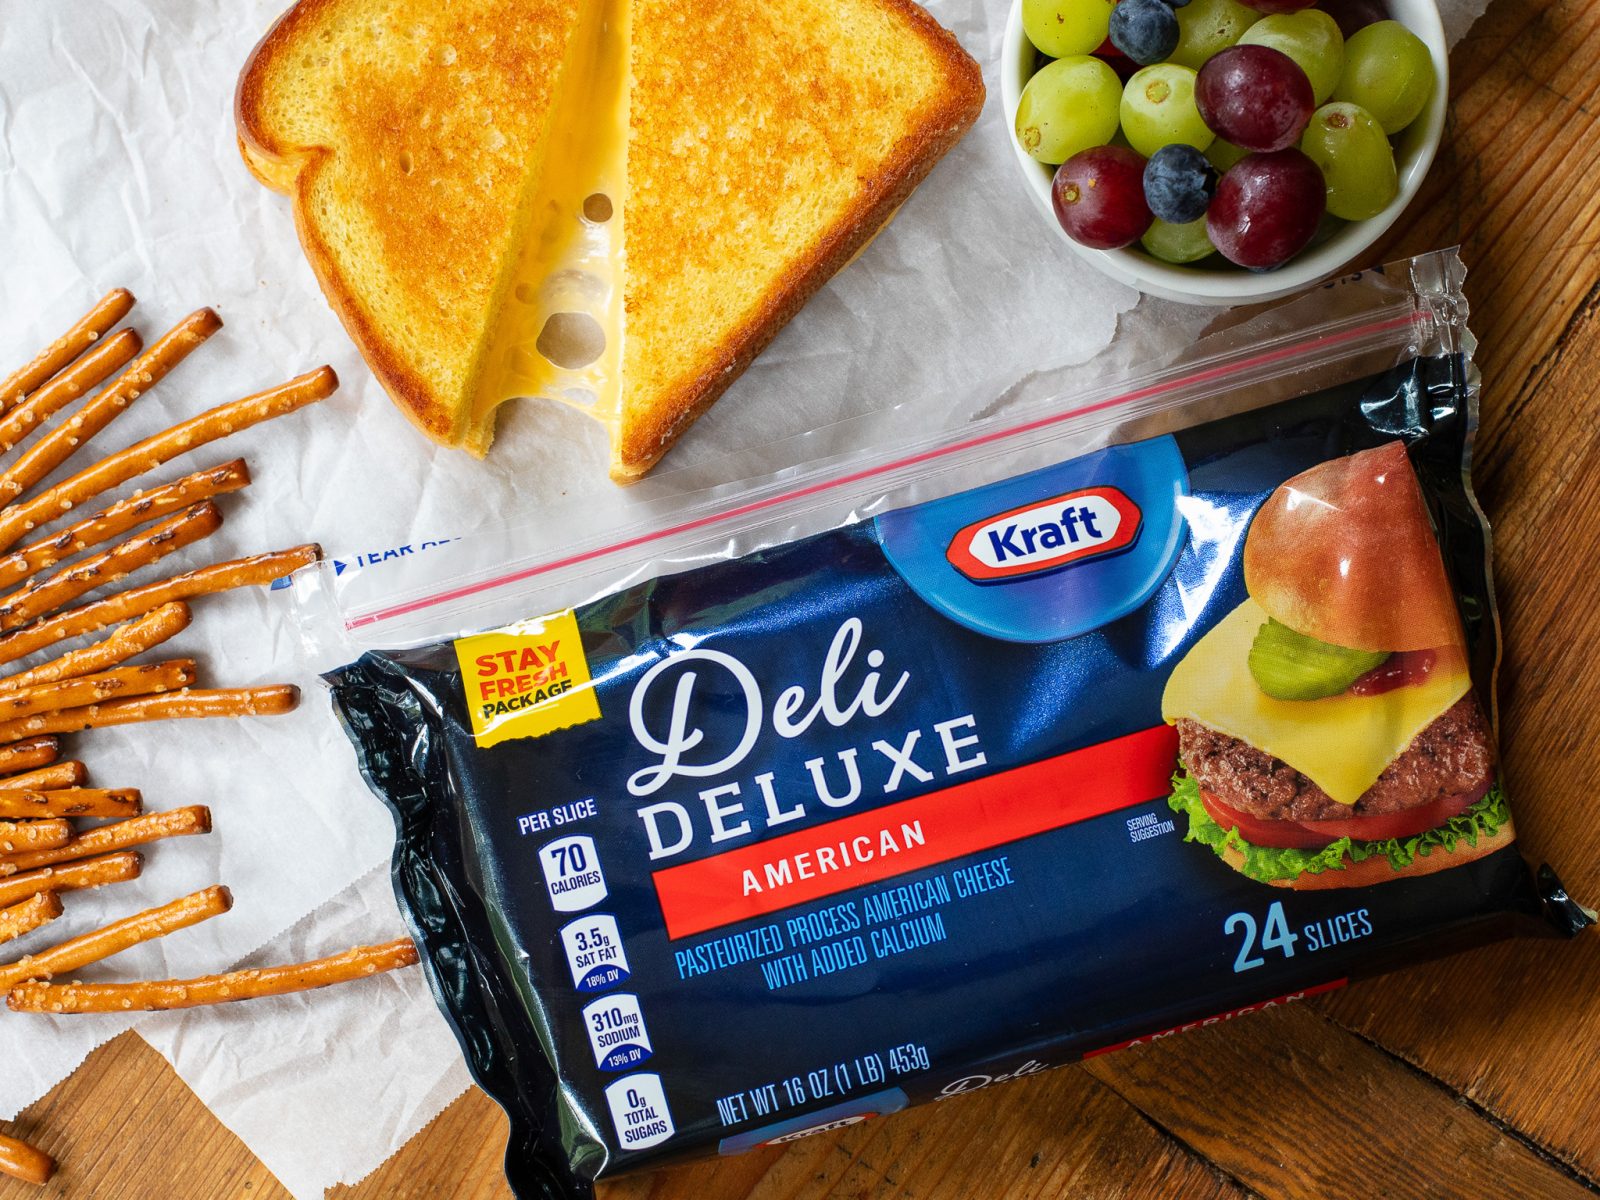 Get The Packs Of Kraft Deli Deluxe Cheese Slices For Just $5.99 At Kroger (Regular Price $8.99)